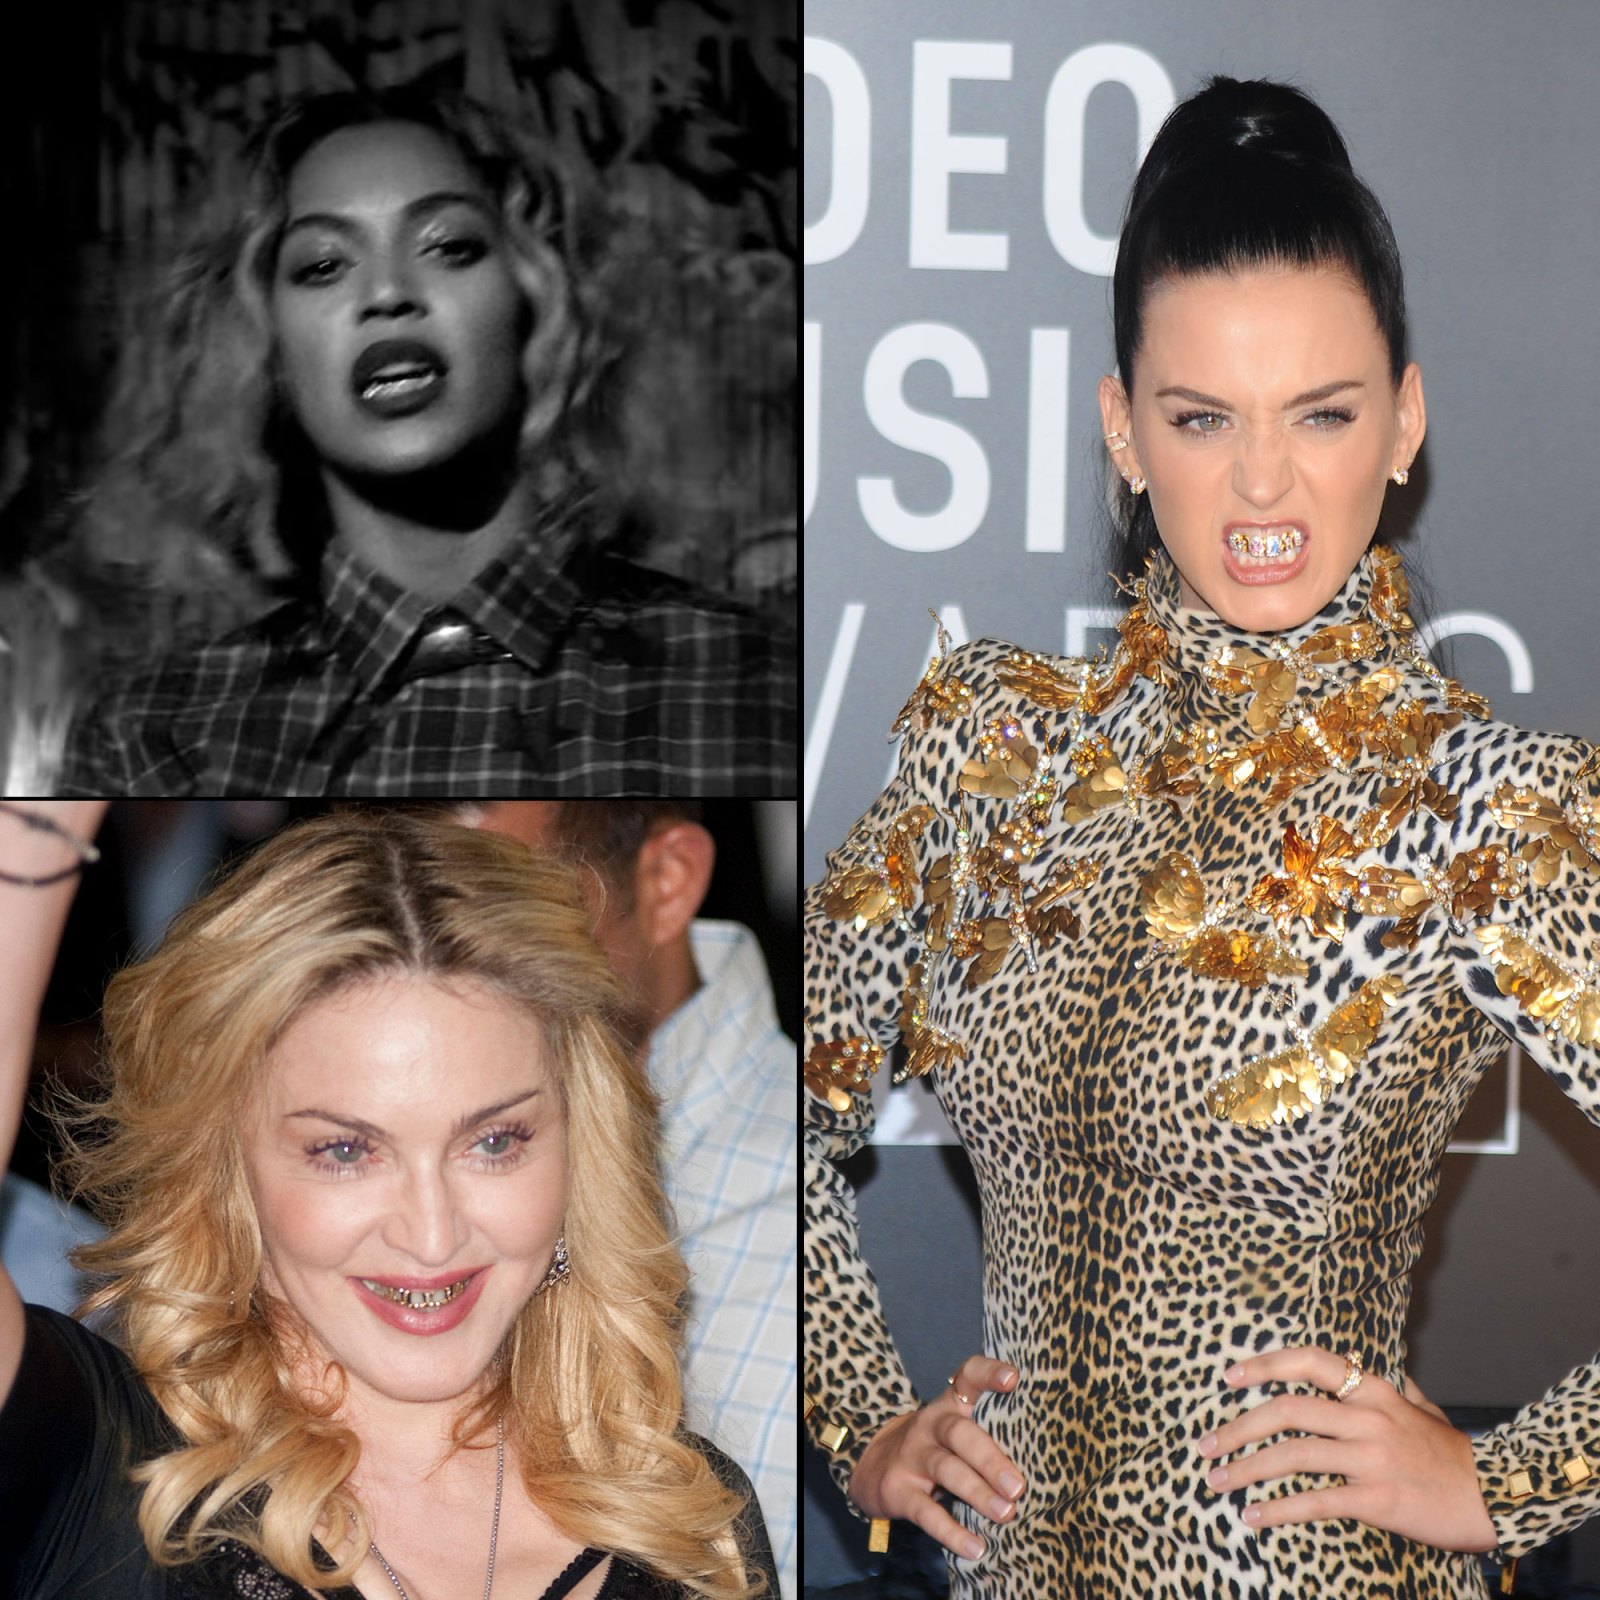 Celebrities Wearing Grillz: The Most Blinged-Out Smiles in Hollywood